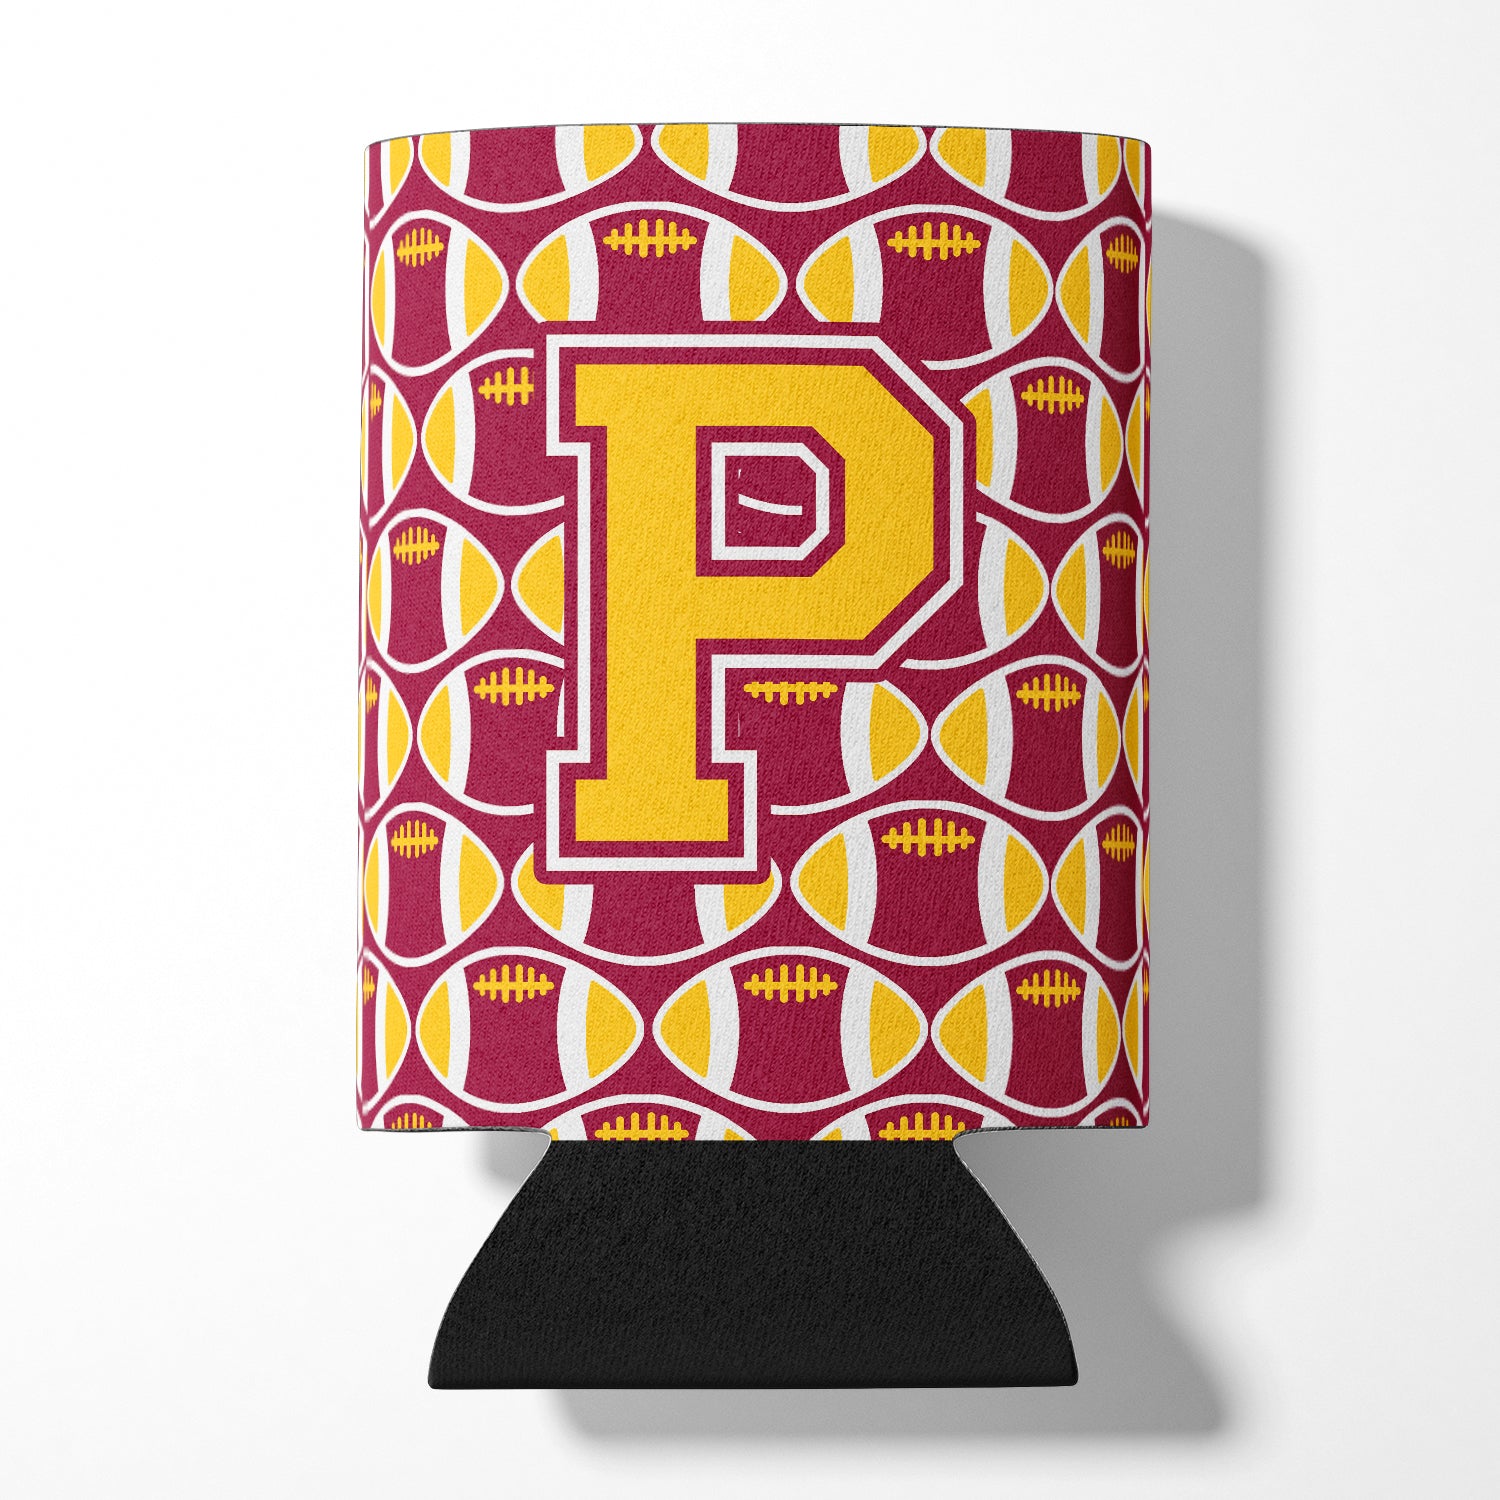 Letter P Football Maroon and Gold Can or Bottle Hugger CJ1081-PCC.